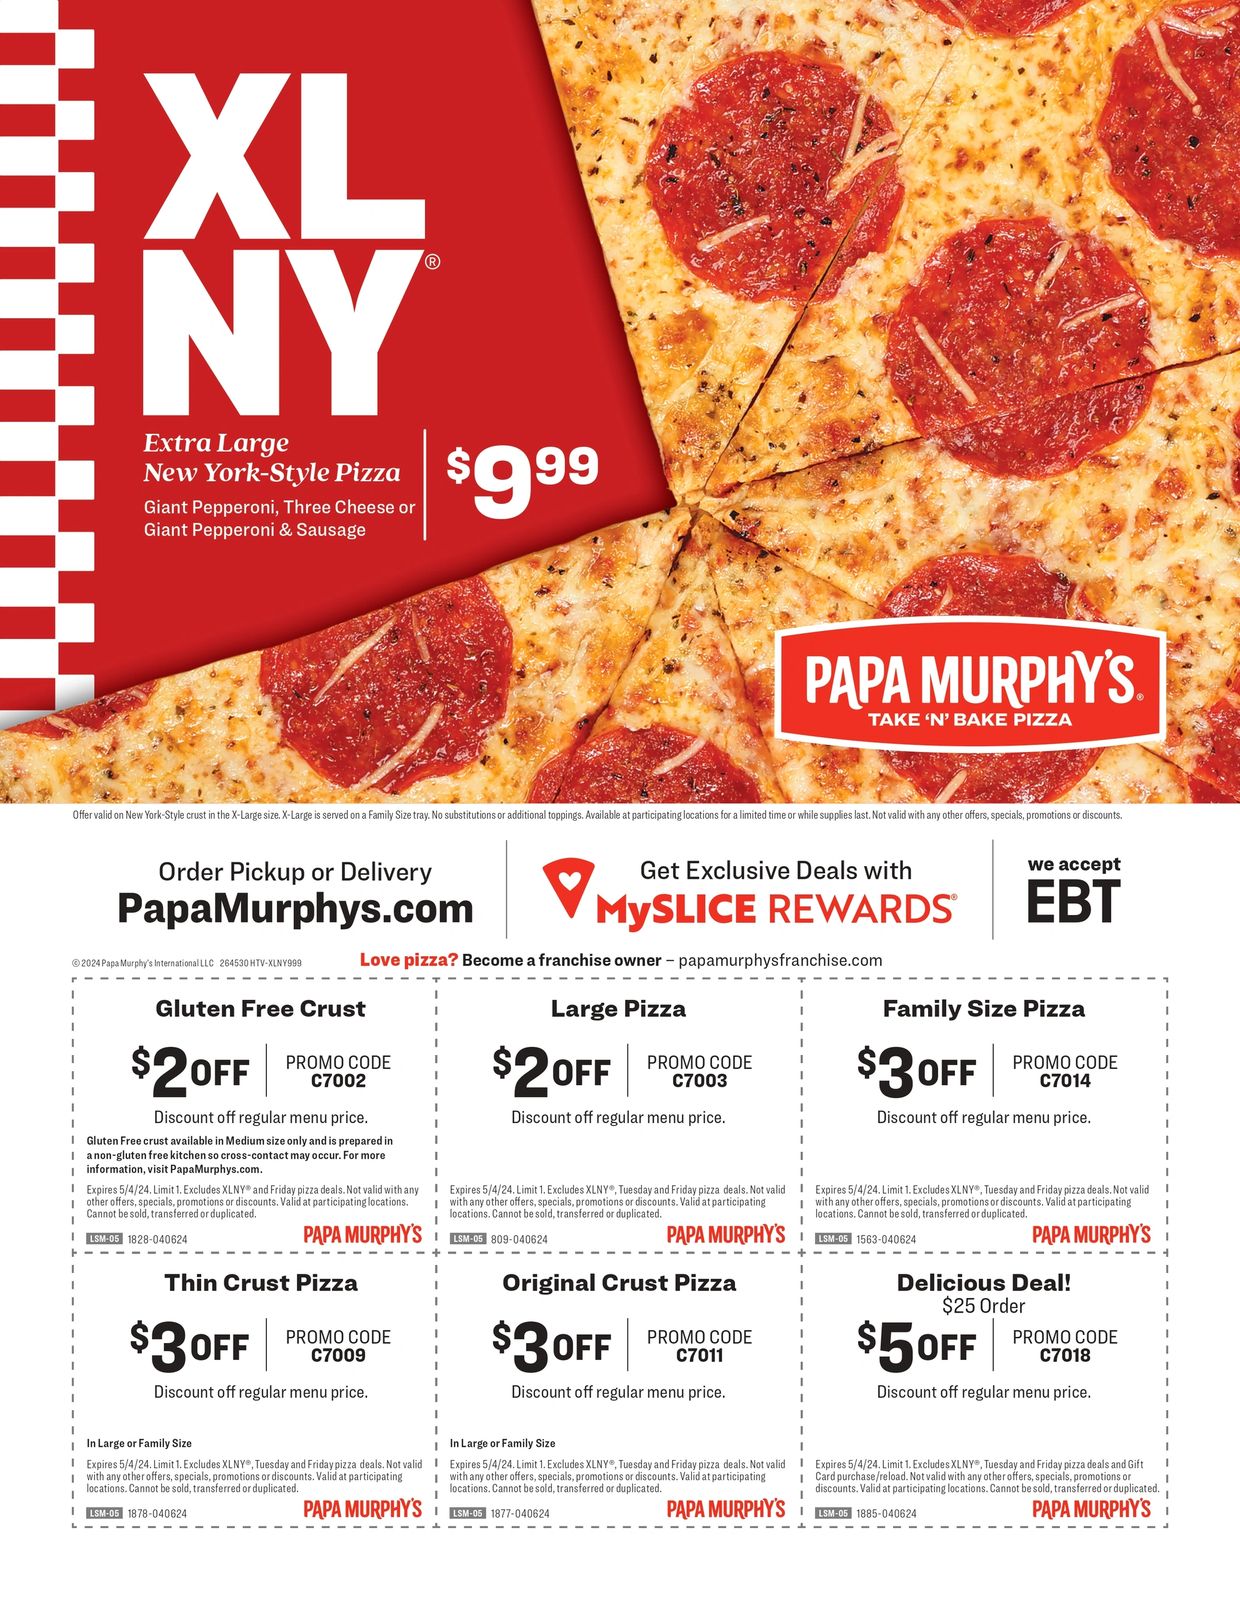 Extra Large New York-Style Pizza For Just $9.99
Order Today